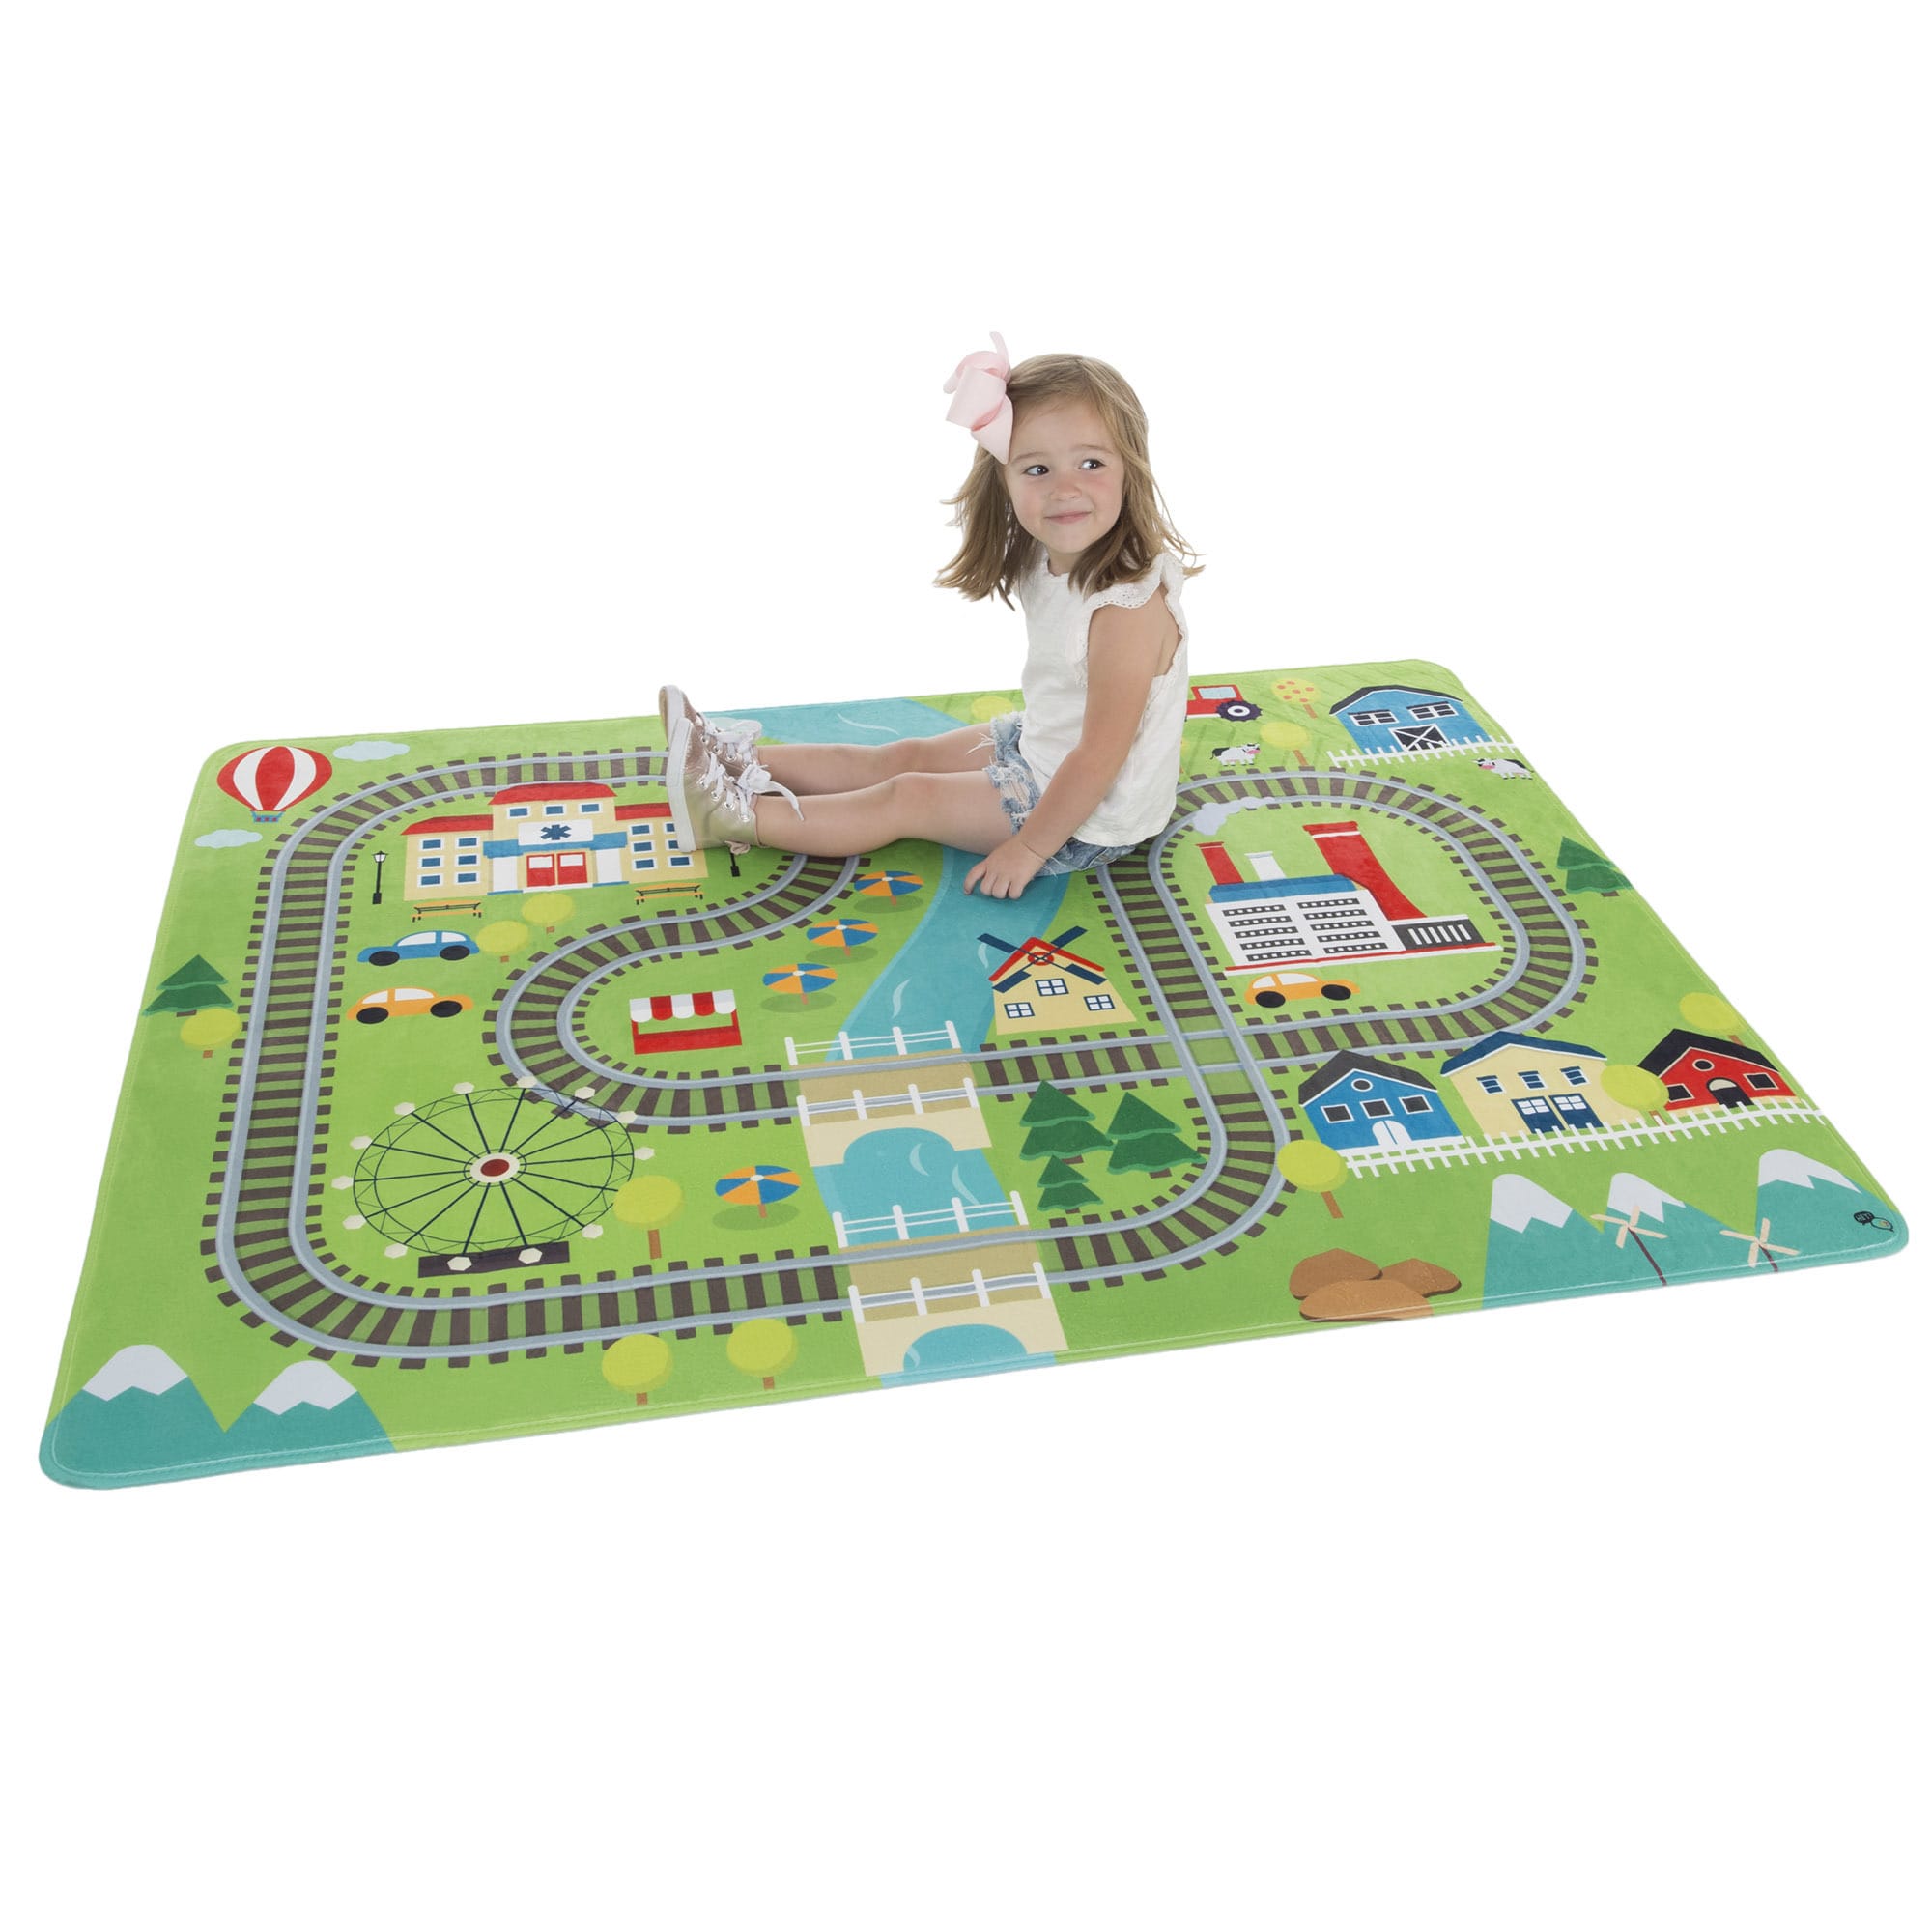 Shop Hey Play Baby Play Mat For Kids Microfiber Flannel Fleece Foam Mat With Non Slip Back And Train Scene Overstock